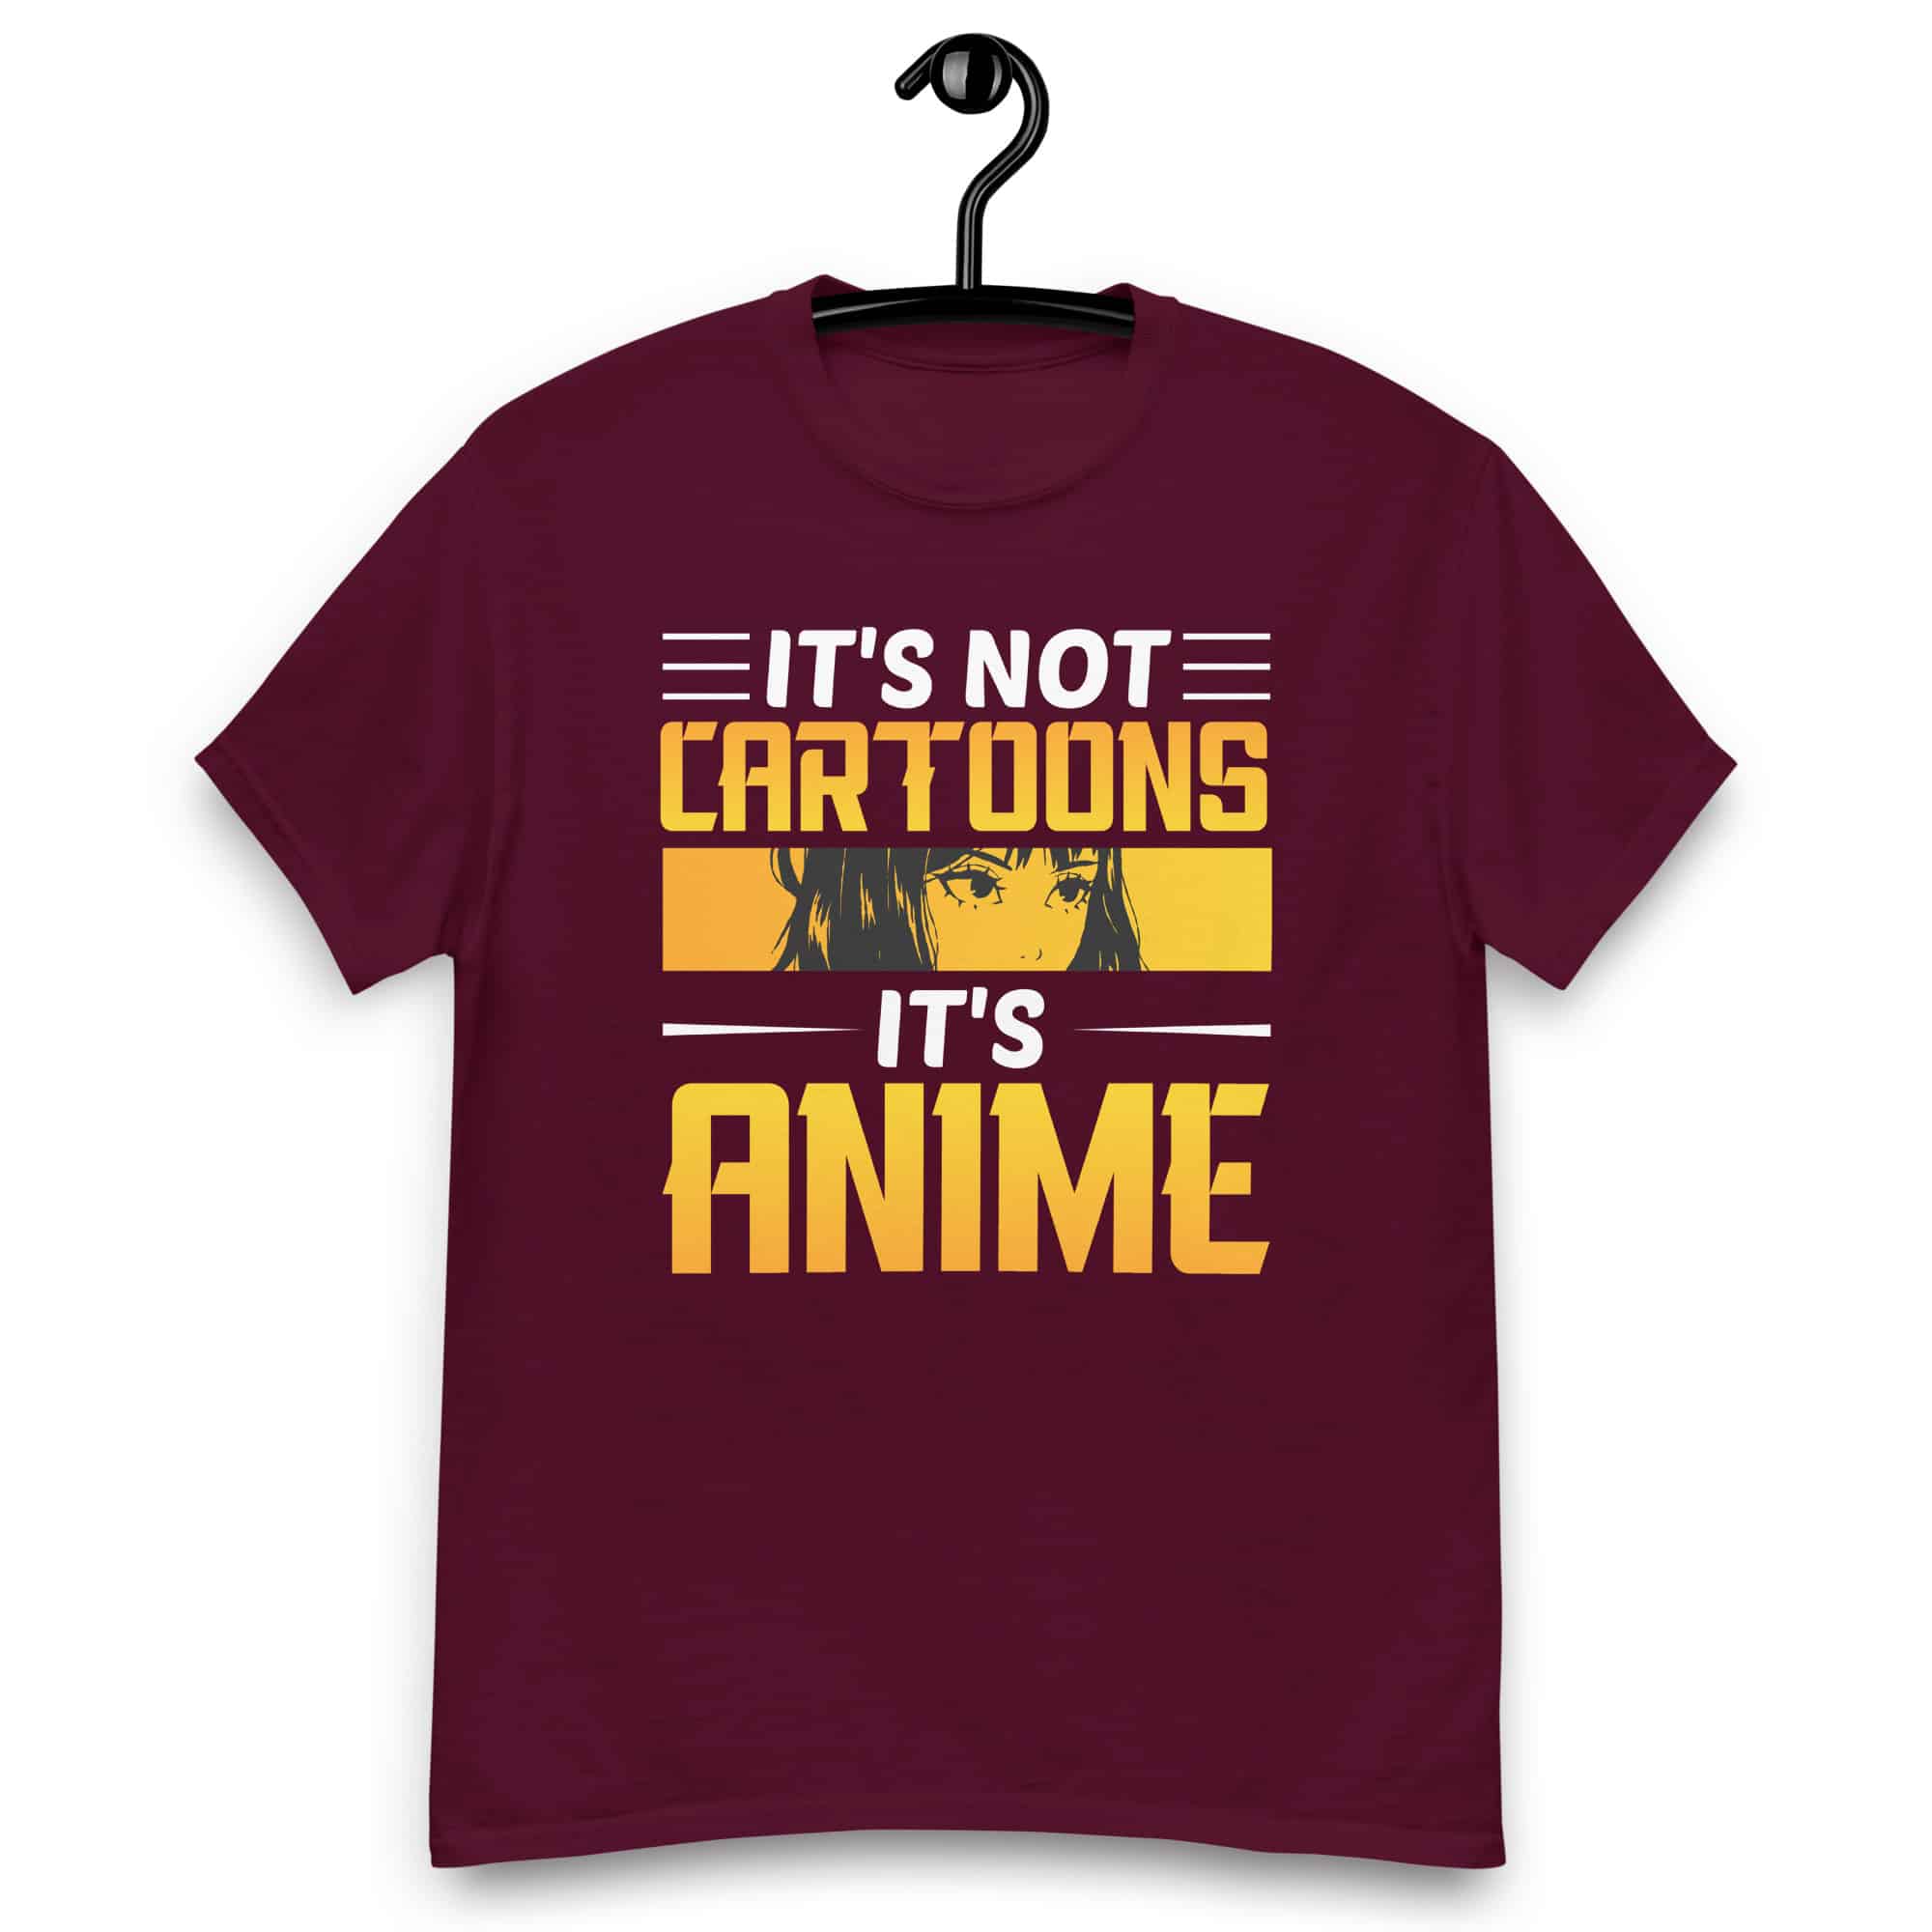 It's Not Cartoons It's Anime Shirt Men's graphic t-shirts Men's designer shirts Premium sweatshirts Unisex hoodies Premium hooded sweatshirts Designer sweatshirts High-quality sweatshirts Luxury sweatshirts Unisex fleece sweatshirts Premium pullover sweatshirts Unisex heavyweight sweatshirts Premium cotton sweatshirts Video game store Gaming merchandise Gaming accessories shop Online gaming store Video game shop near me Gaming console store PC gaming store Gaming gear shop Retro gaming shop Board game shop Anime merchandise Anime store online Japanese anime shop Anime figurines Manga shop Anime DVDs Anime accessories Anime apparel Anime collectibles Anime gifts